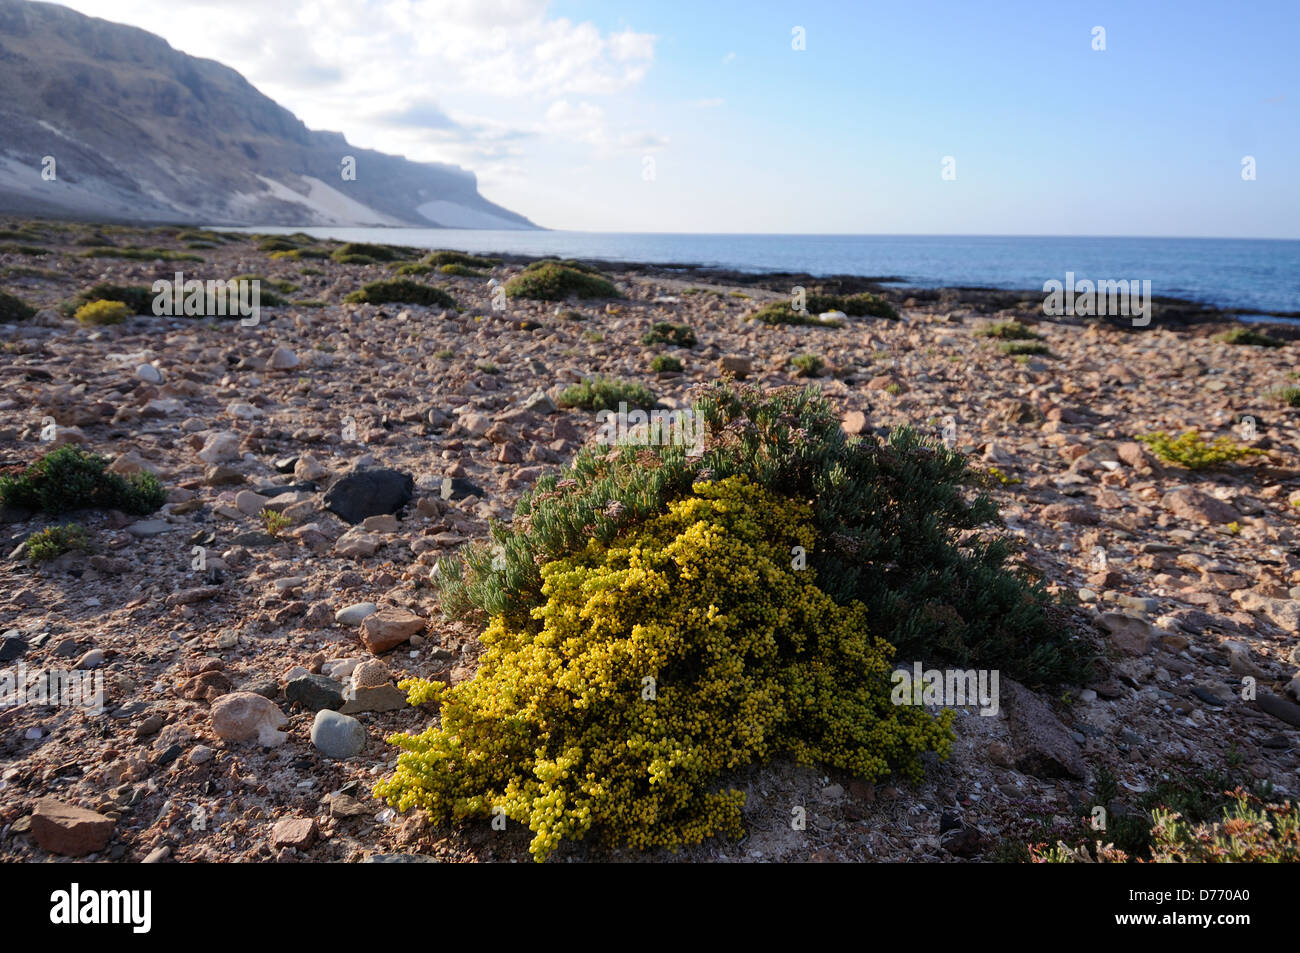 Landscape with some endemic species on the island of Socotra Stock Photo